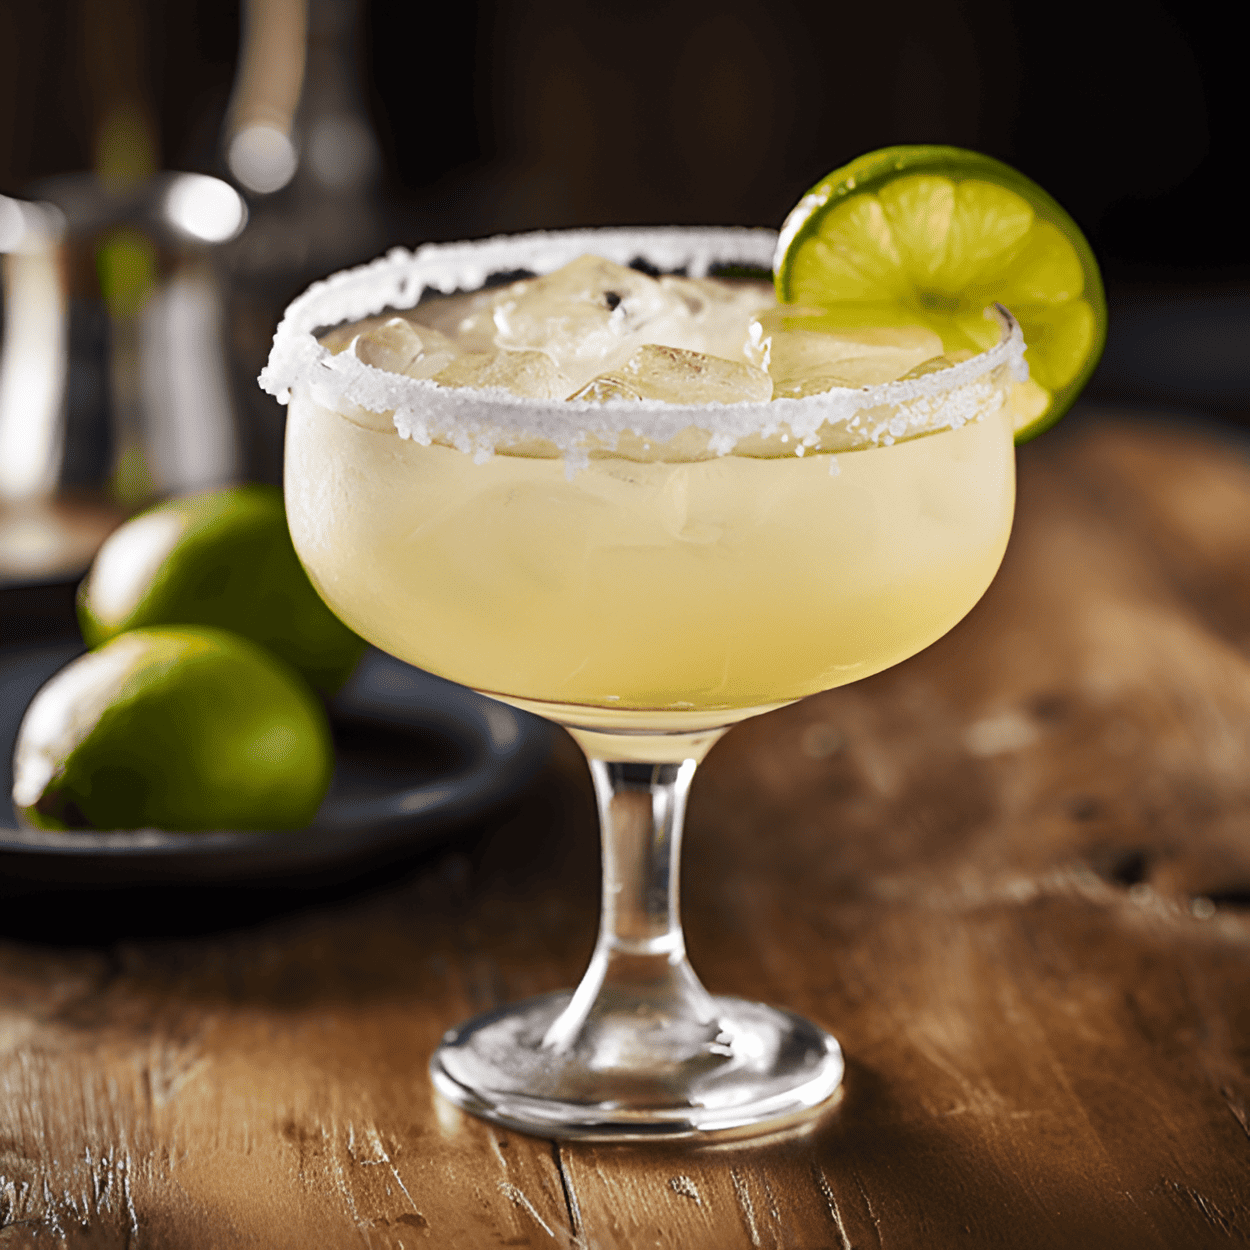 Coronarita Cocktail Recipe - The Coronarita is a refreshing, citrusy cocktail with a beer twist. It's tangy, slightly sweet, and has a hint of bitterness from the beer. The lime juice adds a zesty kick, while the tequila gives it a strong, robust flavor.